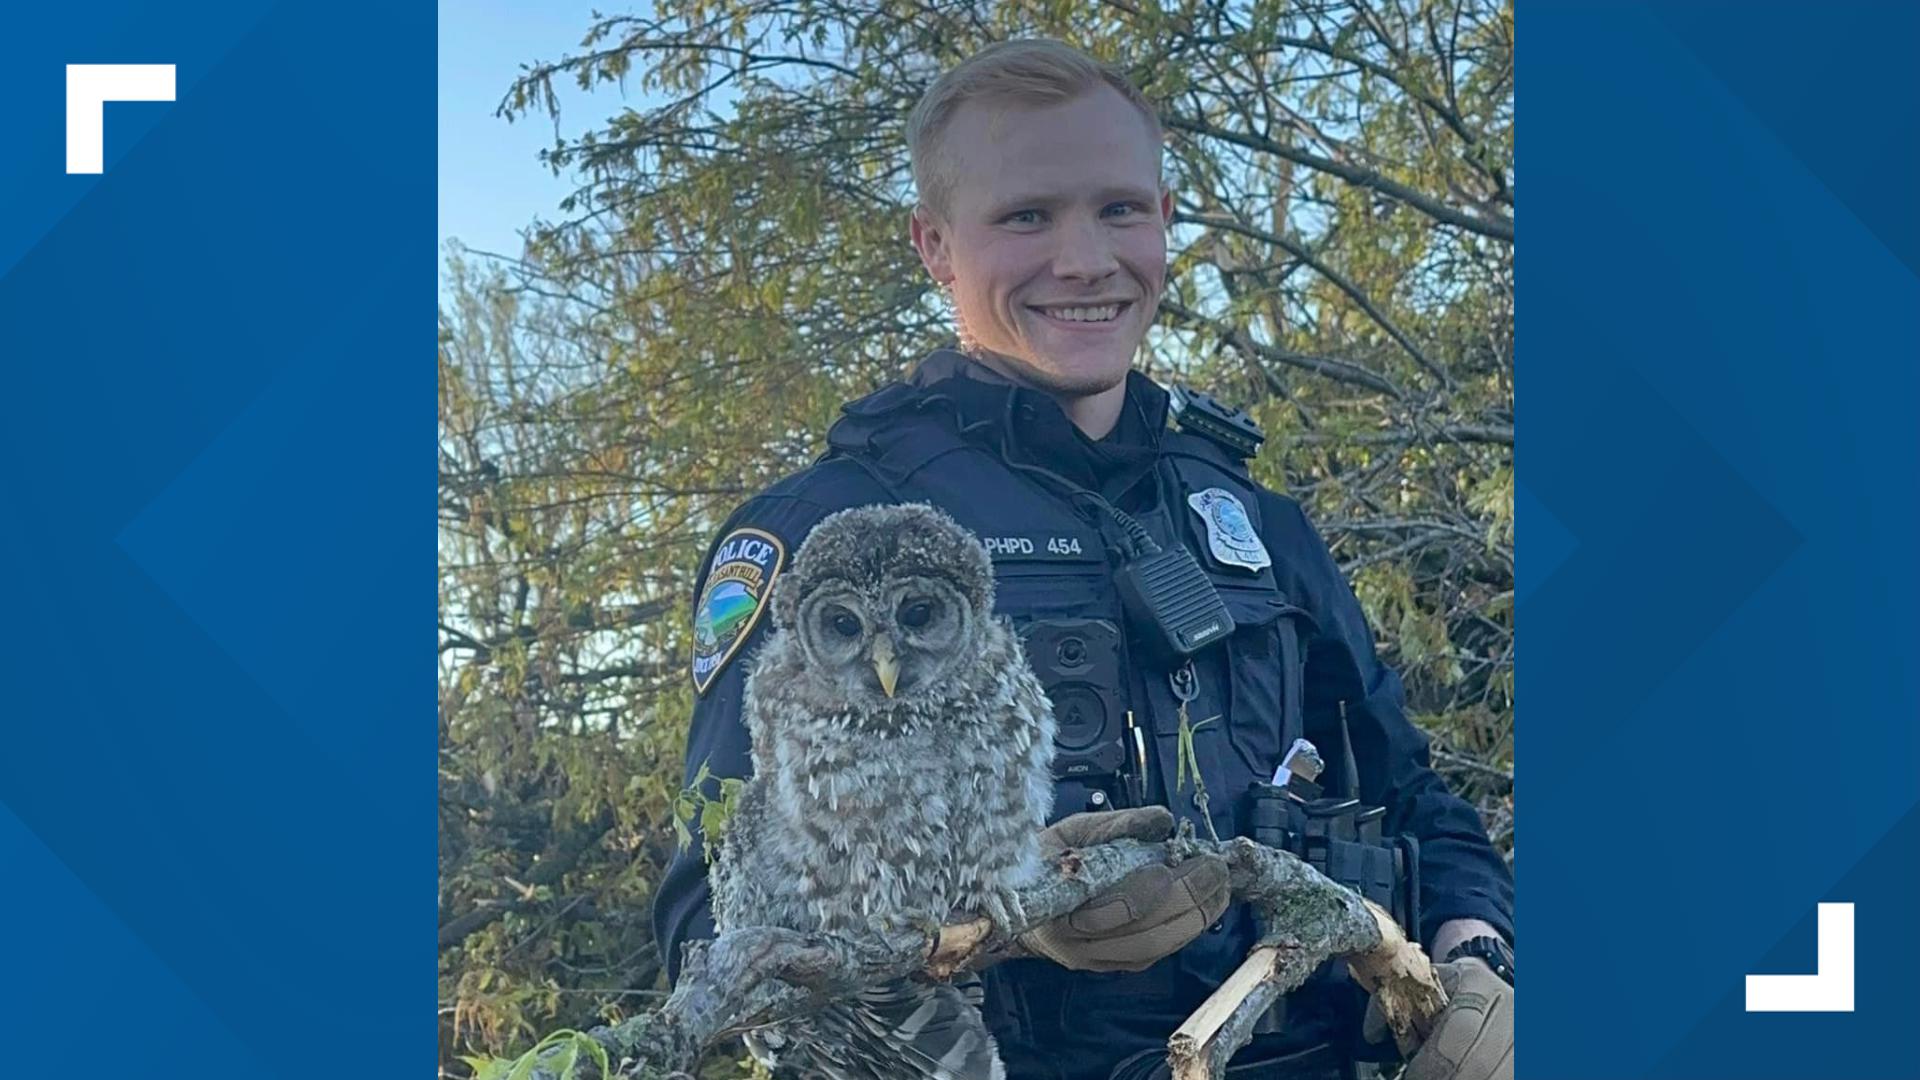 "If you're an animal, if you're a person, I'm gonna be there for you because that's what being a cop is," officer Mason Roberts said.